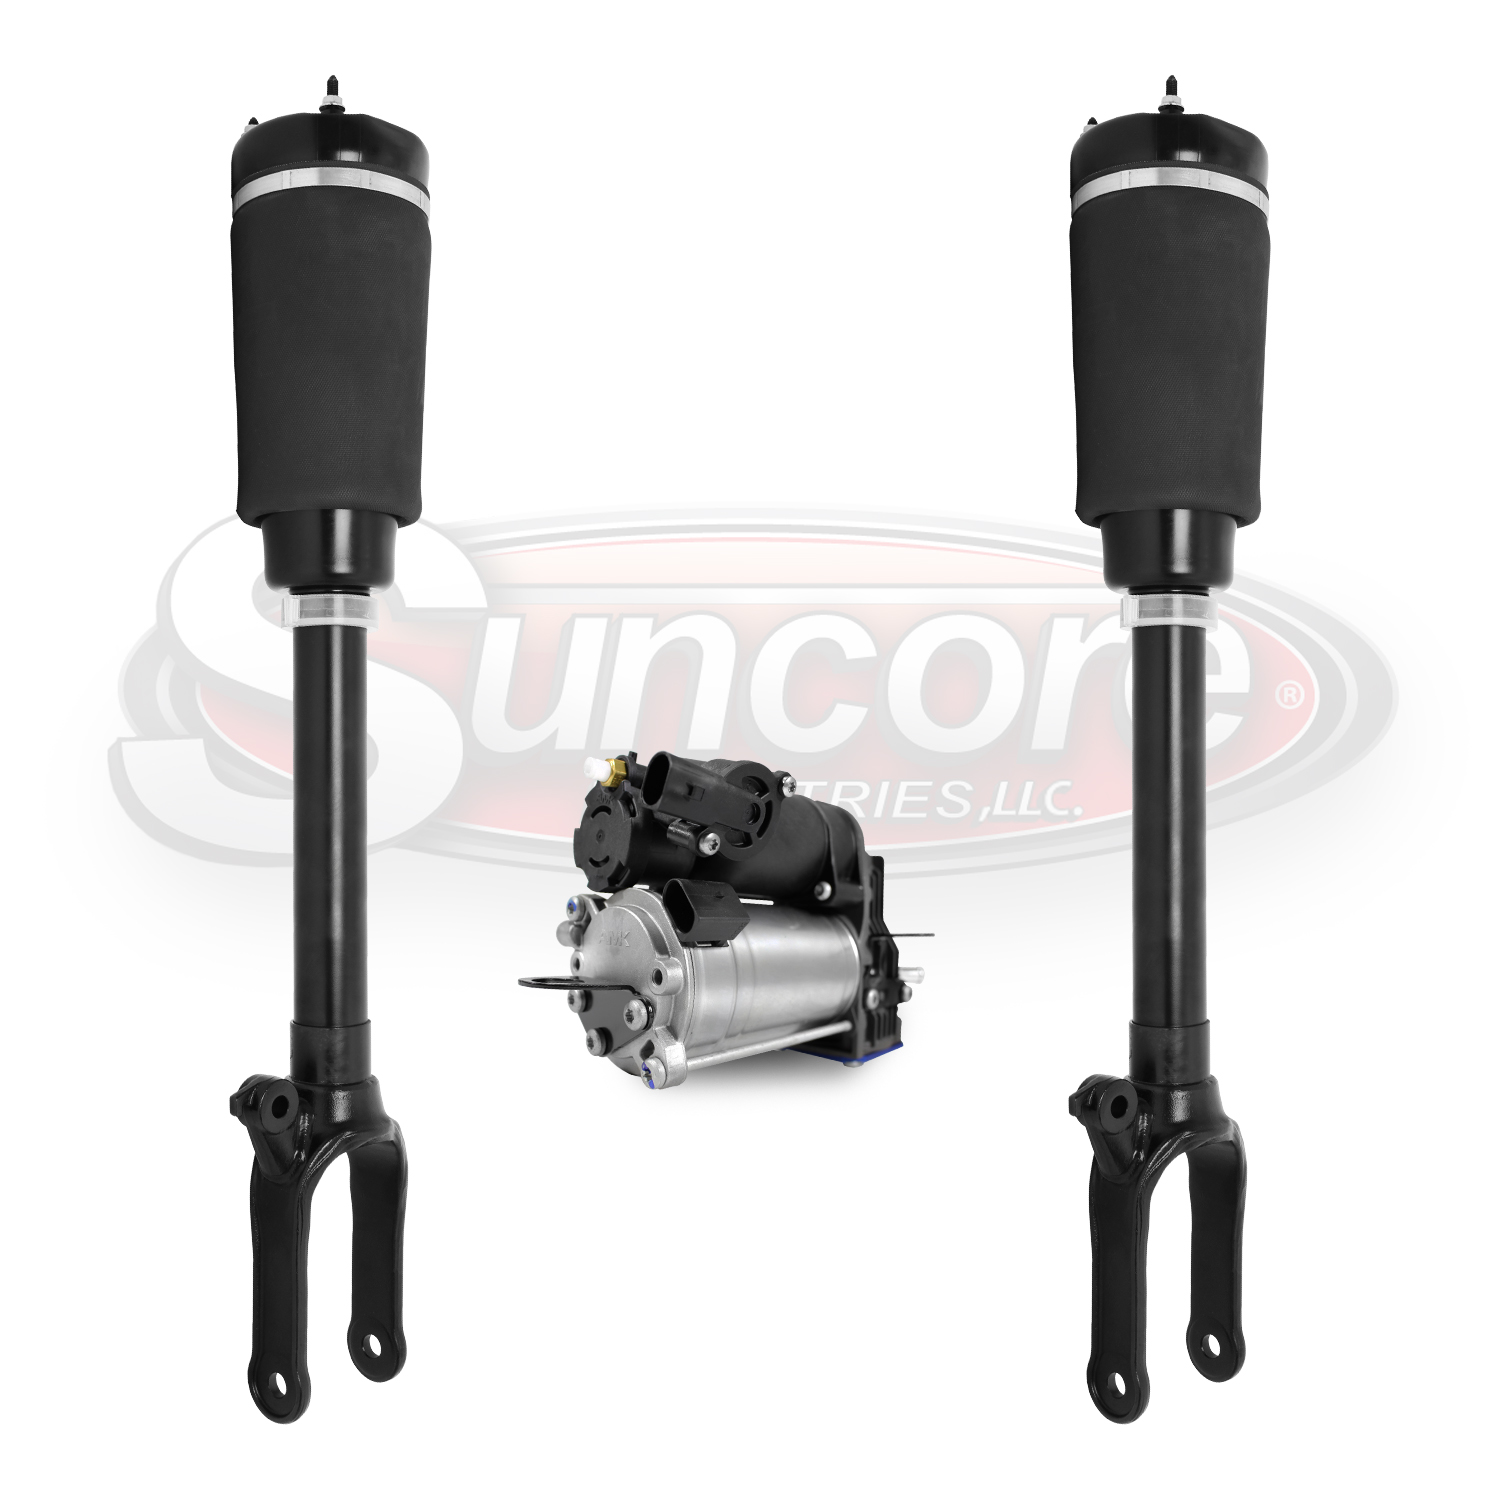 Mercedes GL320, GL350, GL450, GL550 AIrmatic Suspension Front Air Strut Assemblies & Air Compressor without ADS